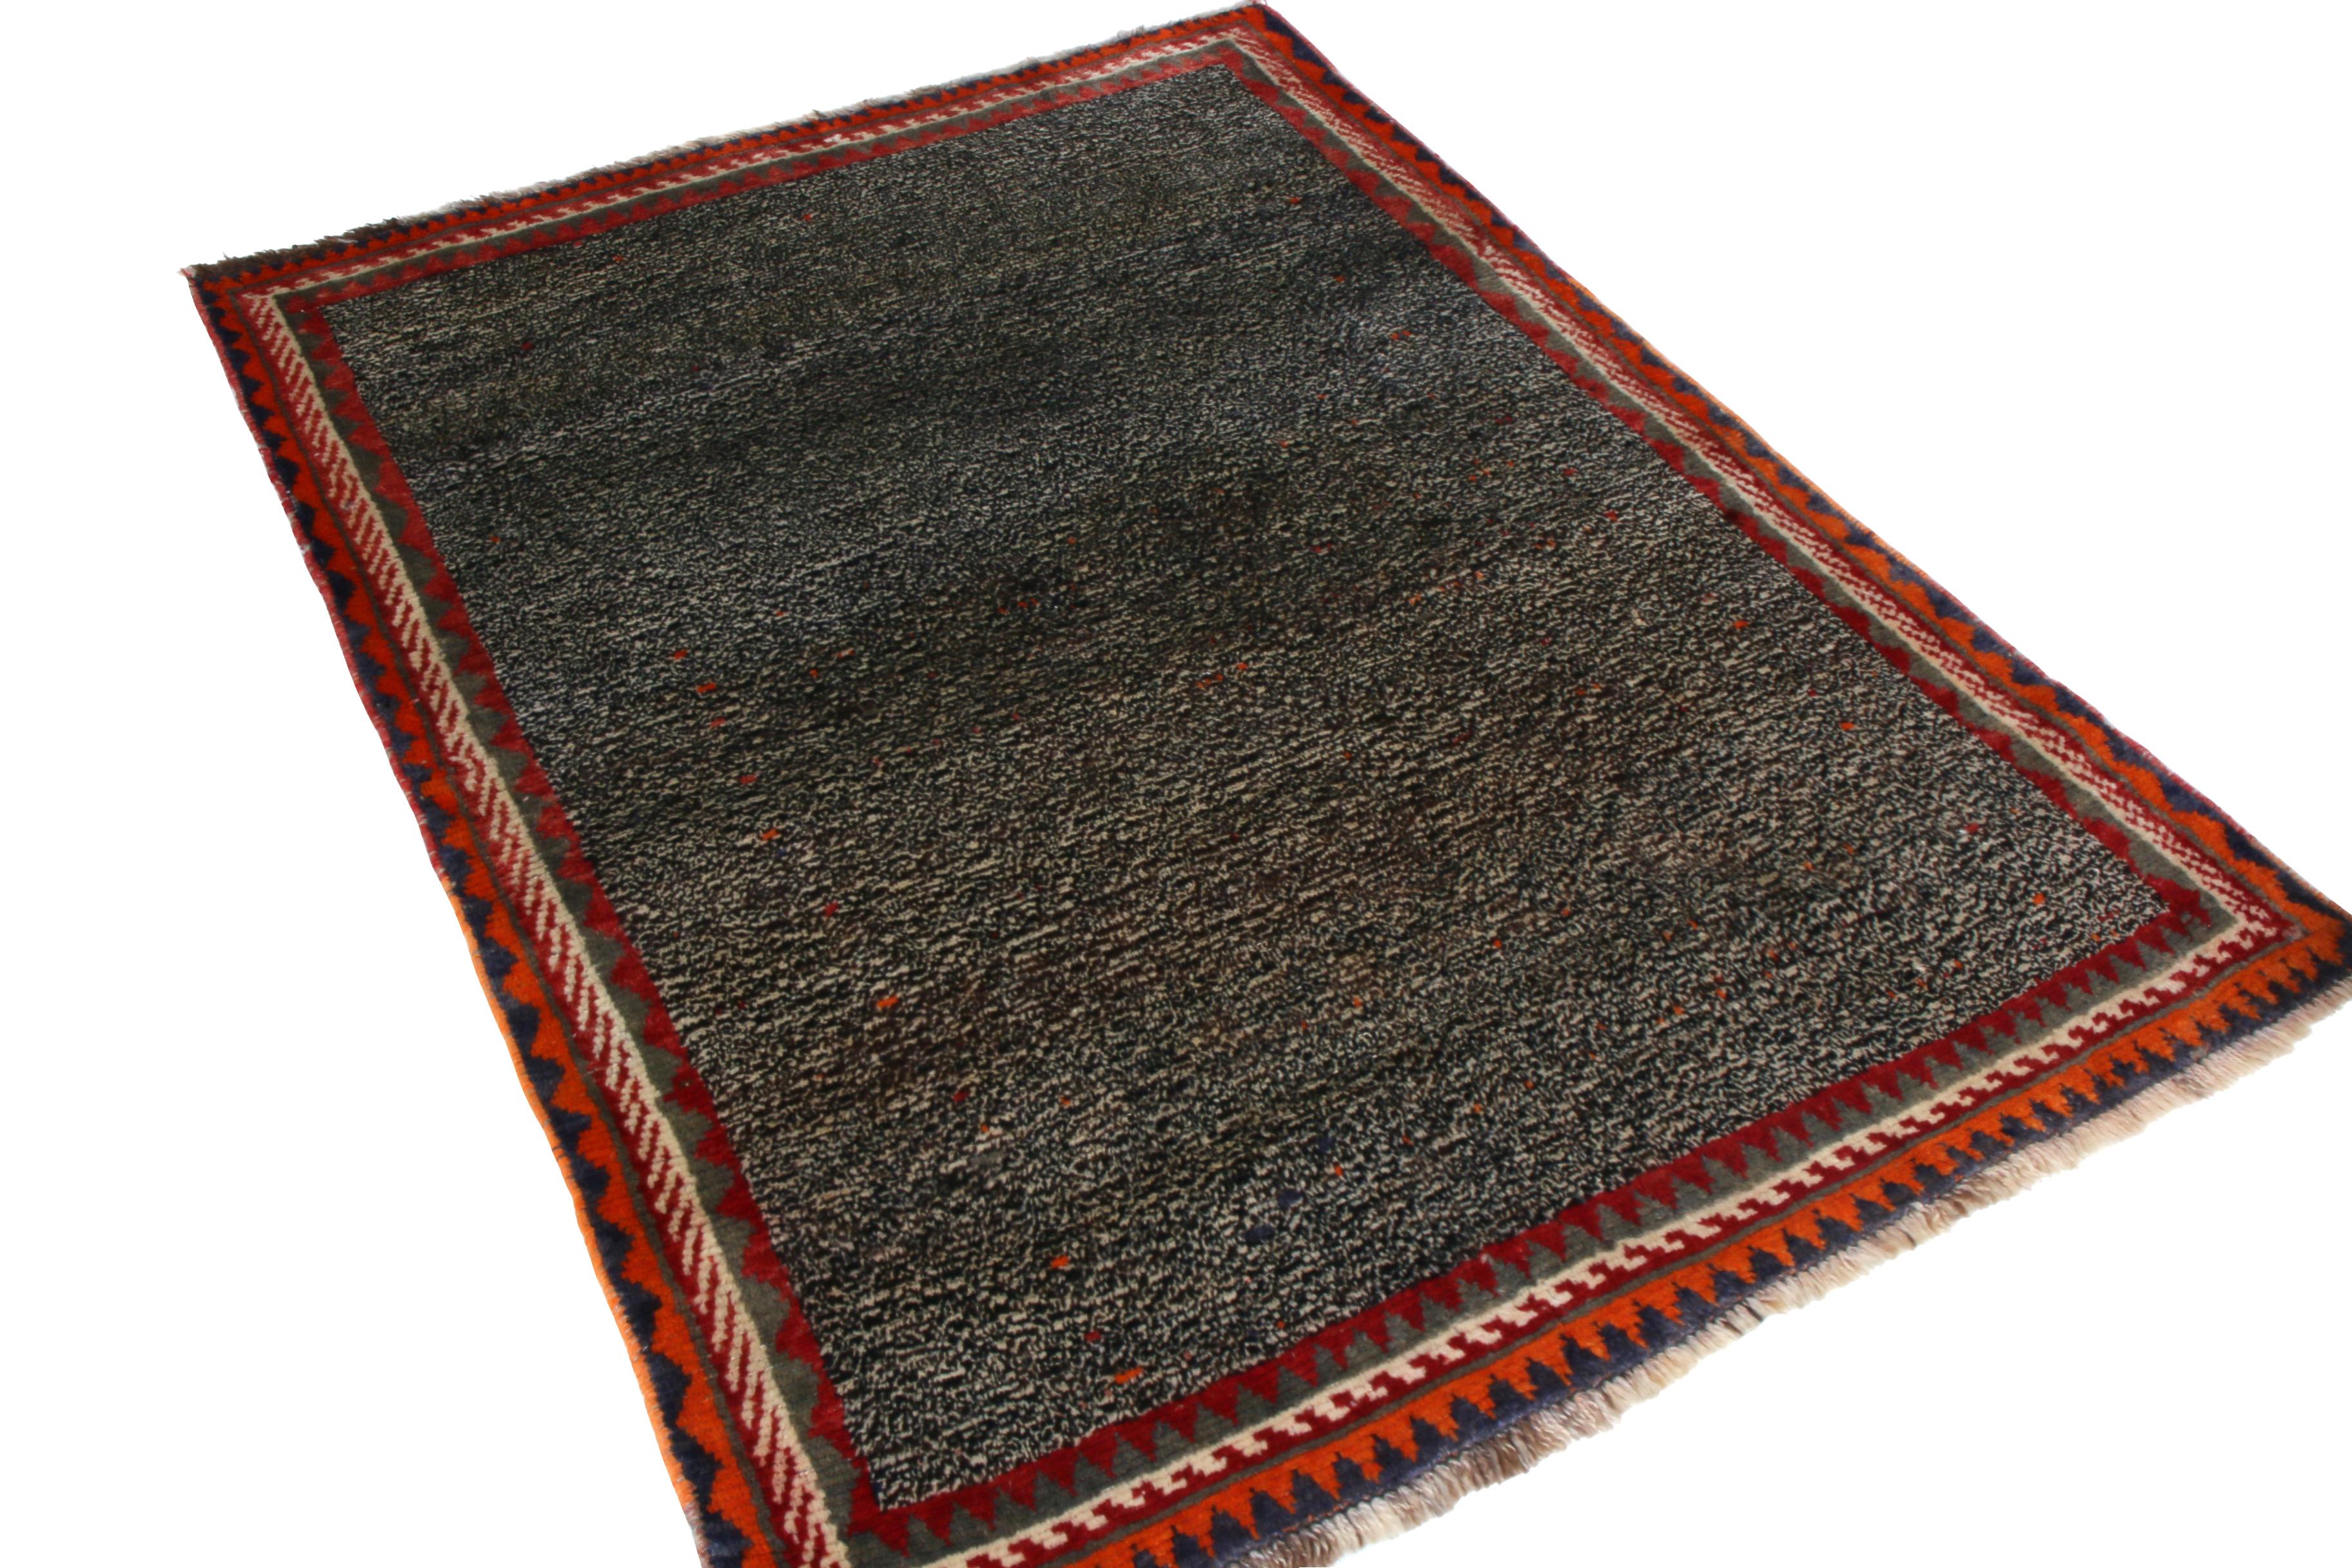 Made with hand knotted wool originating between 1910-1920, this antique Gabbeh Persian rug enjoys the tactful juxtaposition of a tribal geometric border with a more granular, subtle all-over field design, likewise a play of the vibrant red and